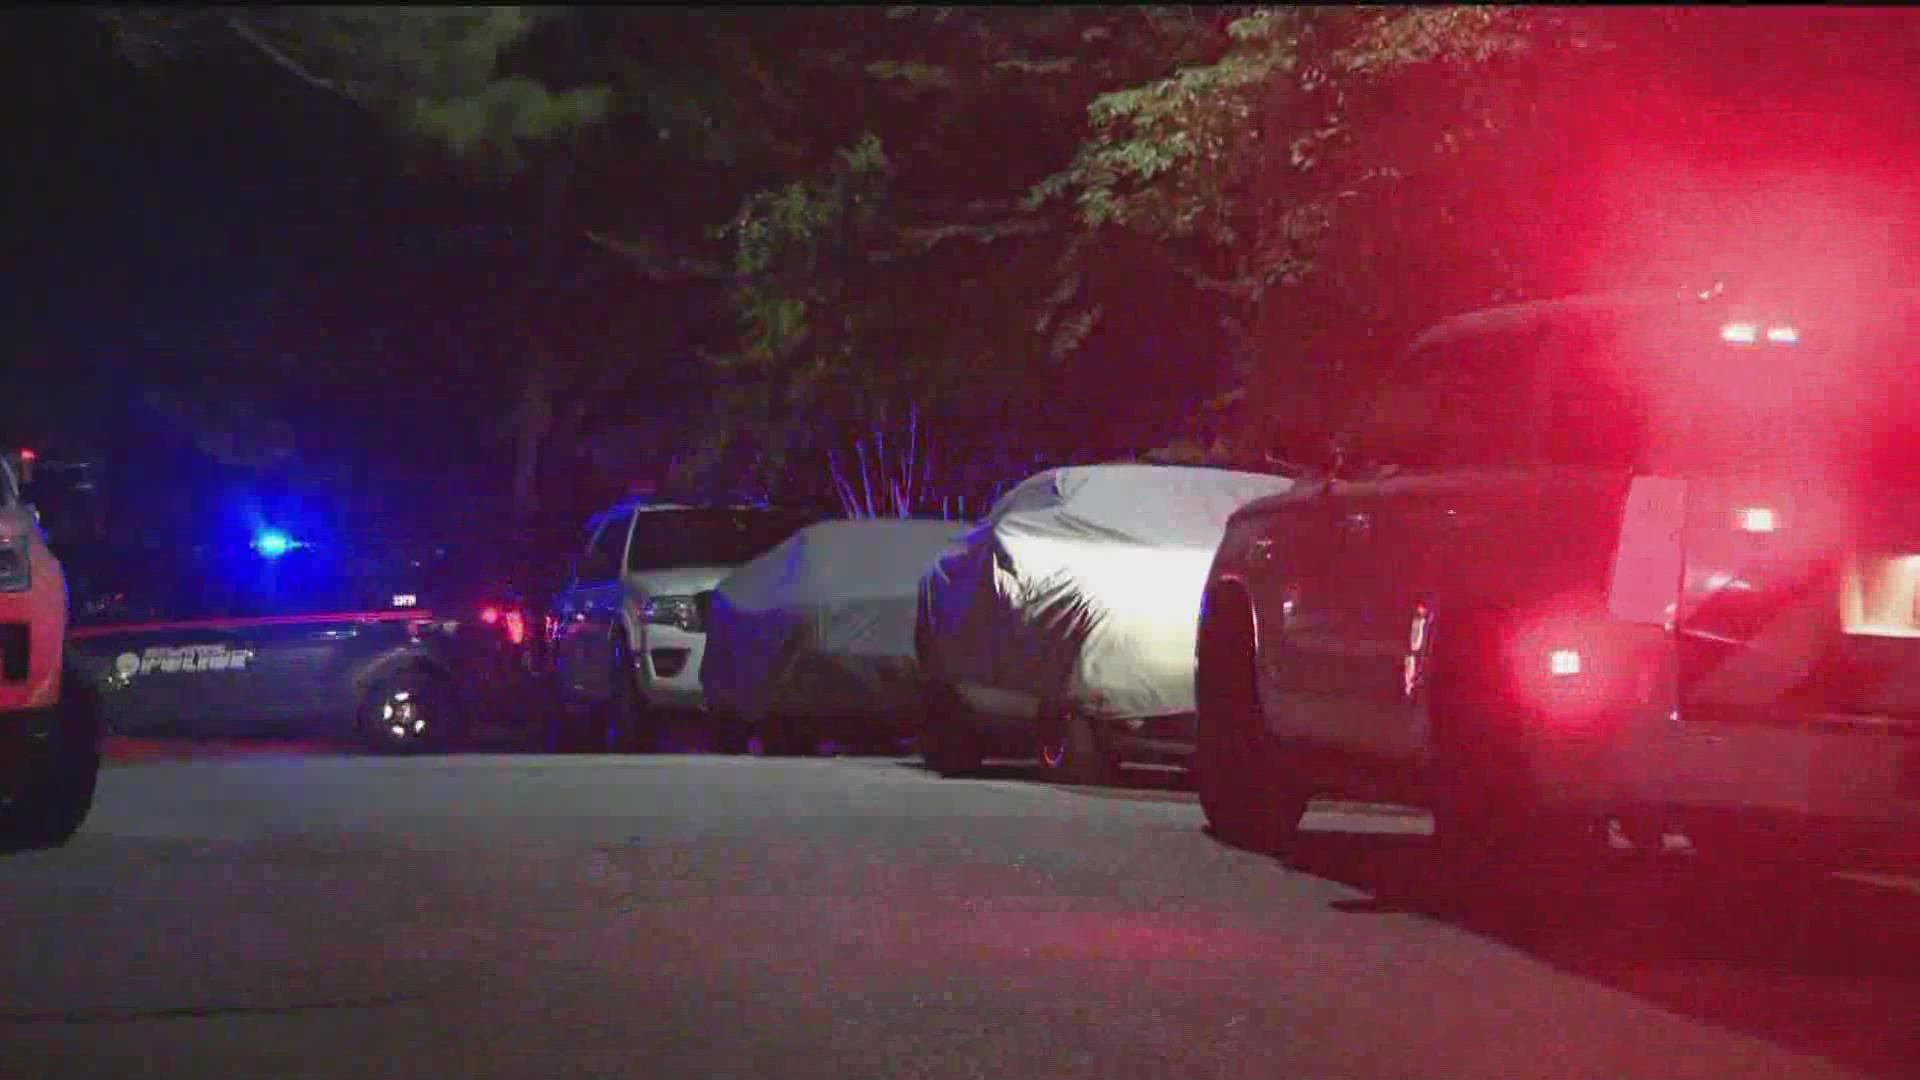 An hours-long SWAT situation is underway at a home in northwest Atlanta Friday night, according to the Atlanta Police Department.